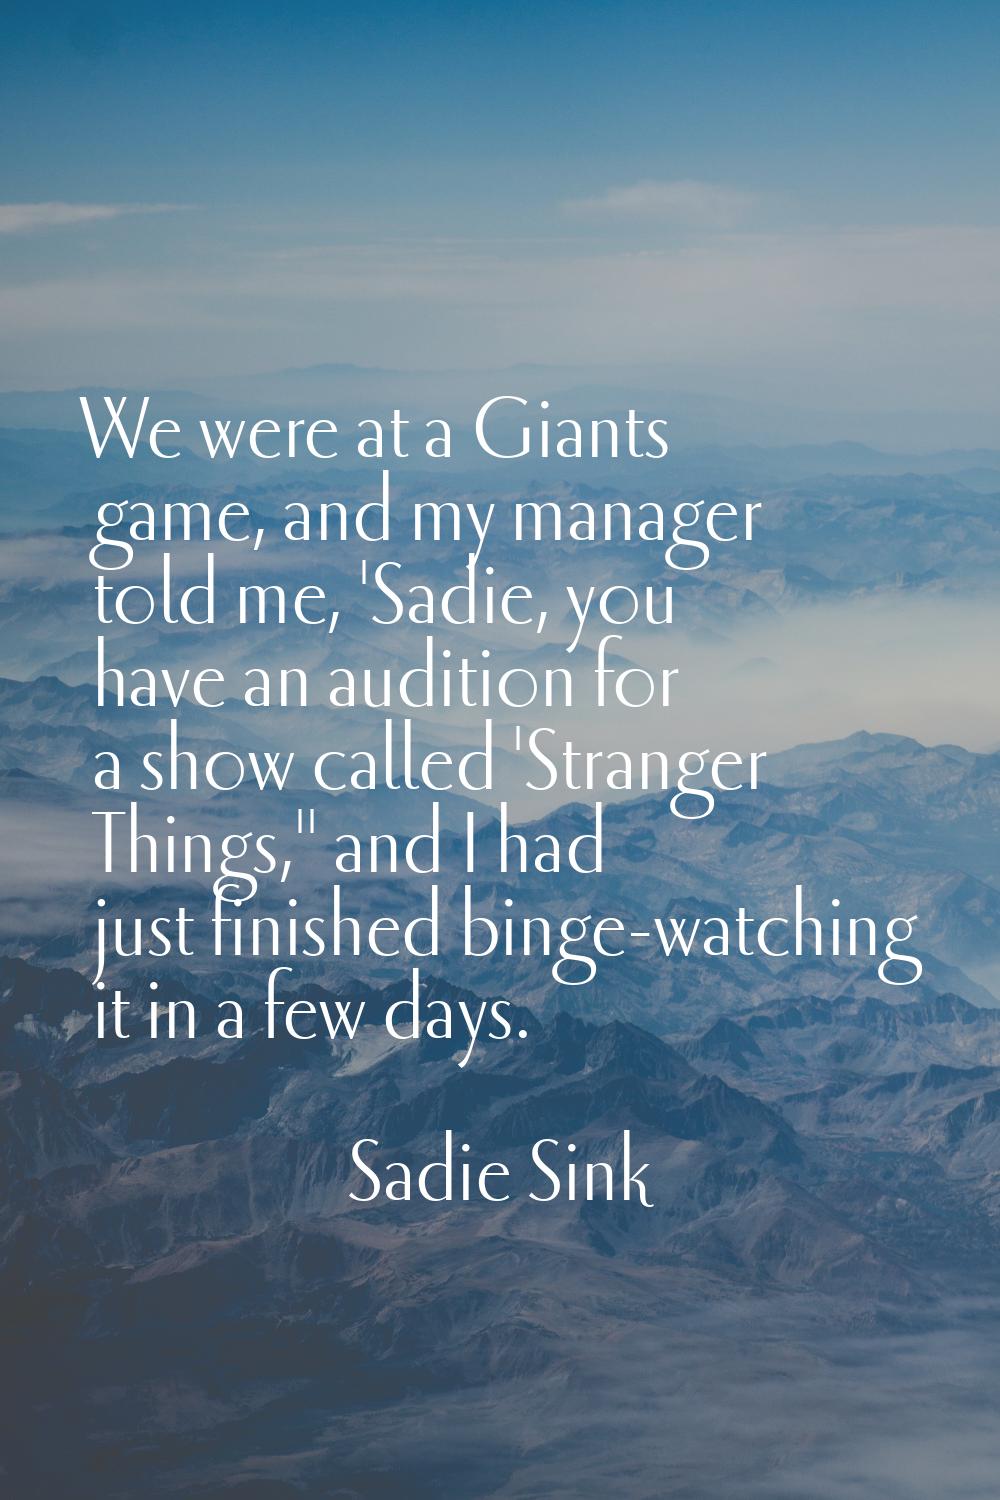 We were at a Giants game, and my manager told me, 'Sadie, you have an audition for a show called 'S